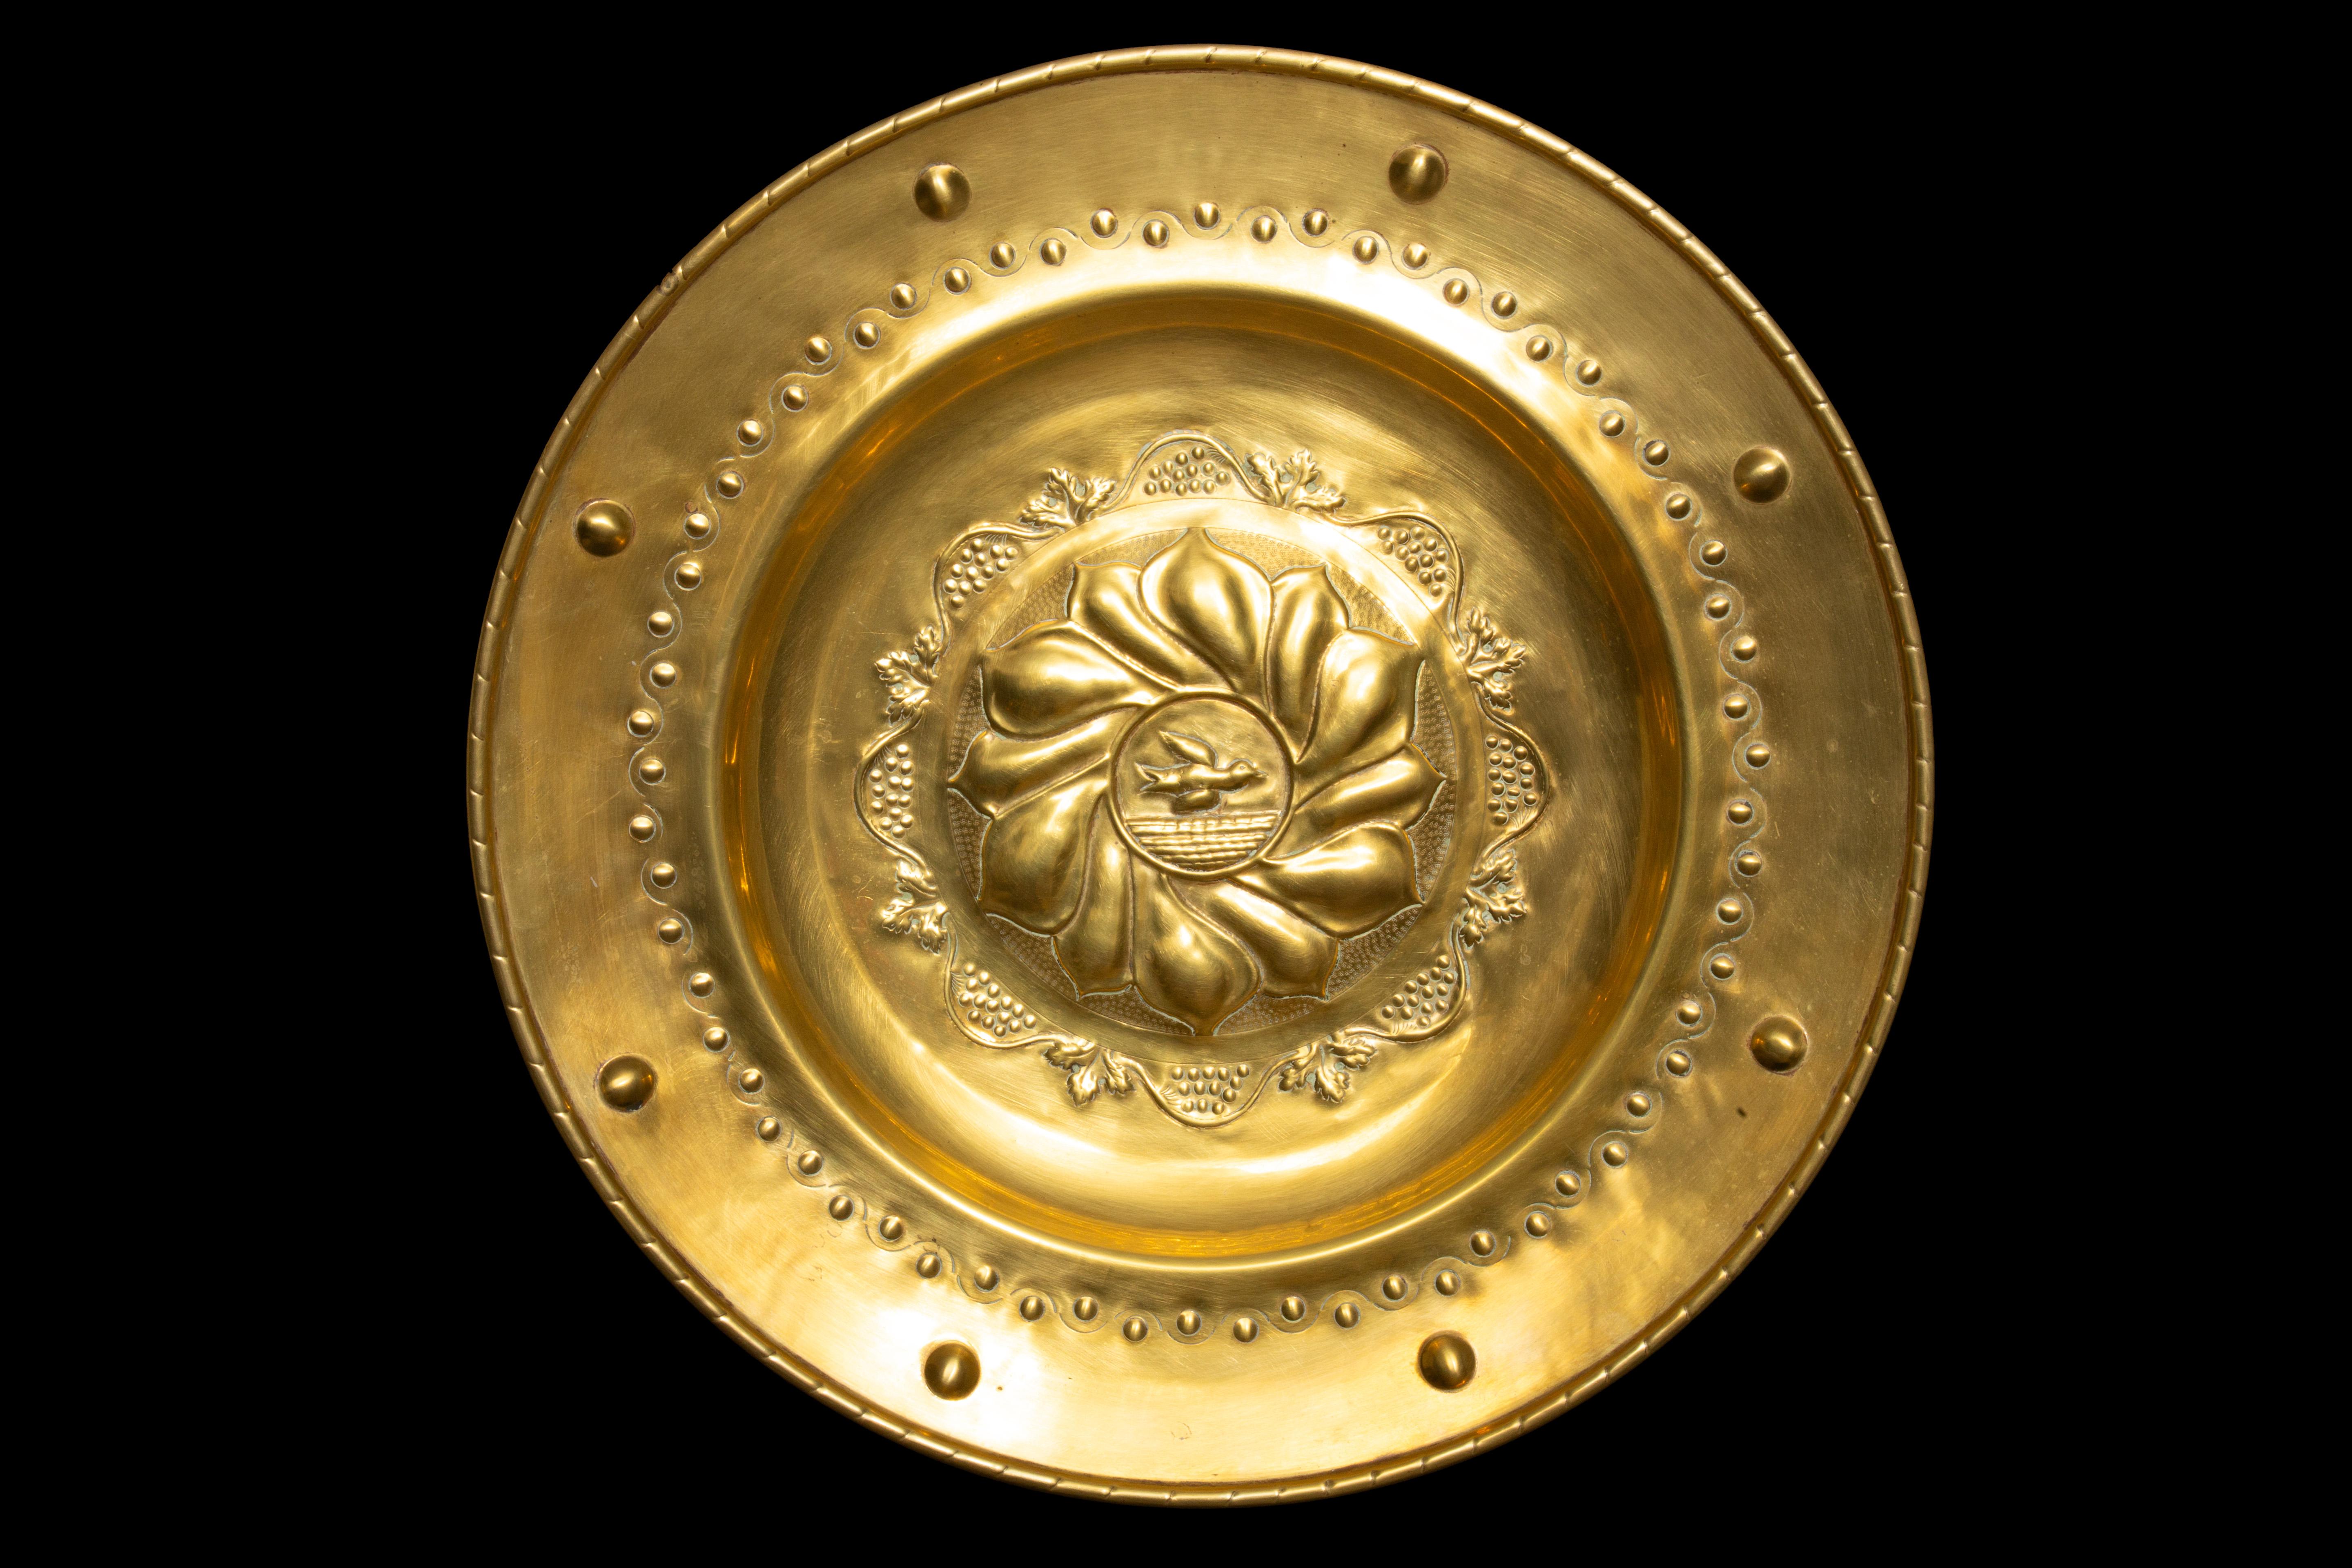 Exquisite 19th-century English ornamental brass alms dish, meticulously crafted to serve as a captivating vessel for collecting offerings from congregations. This remarkable piece, measuring an impressive 21.75 inches in diameter, features an